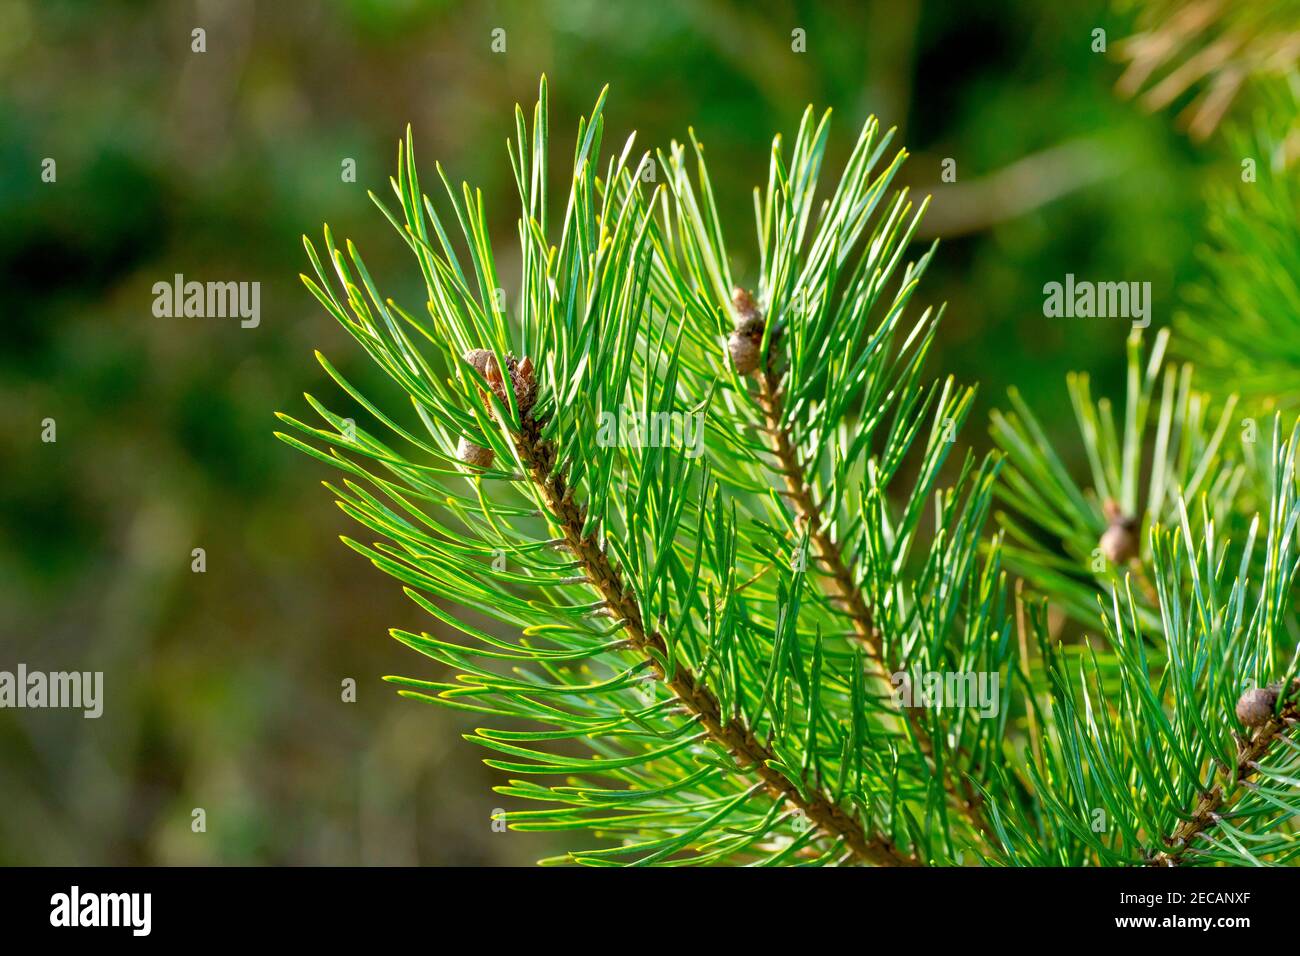 Scots Pine (pinus sylvestris), close up showing the tip of a branch with young immature cones and backlit green needles. Stock Photo